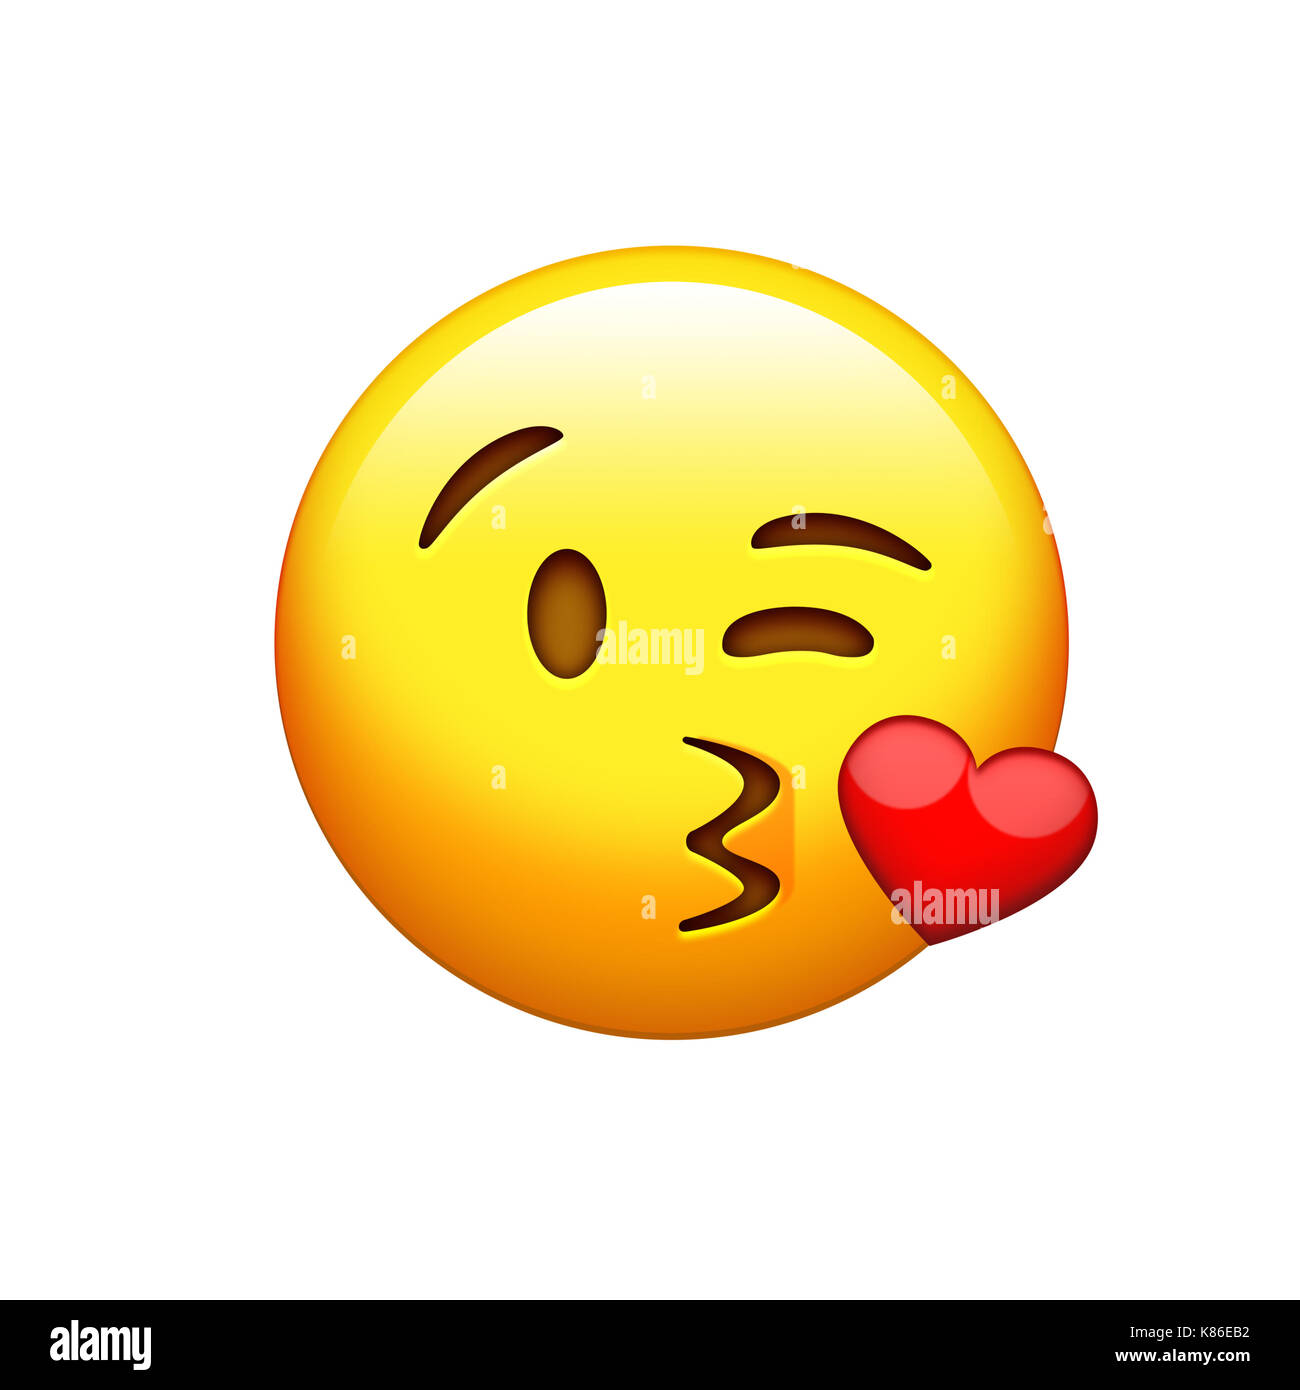 The isolated yellow smiley face with kissing mouth icon Stock Photo